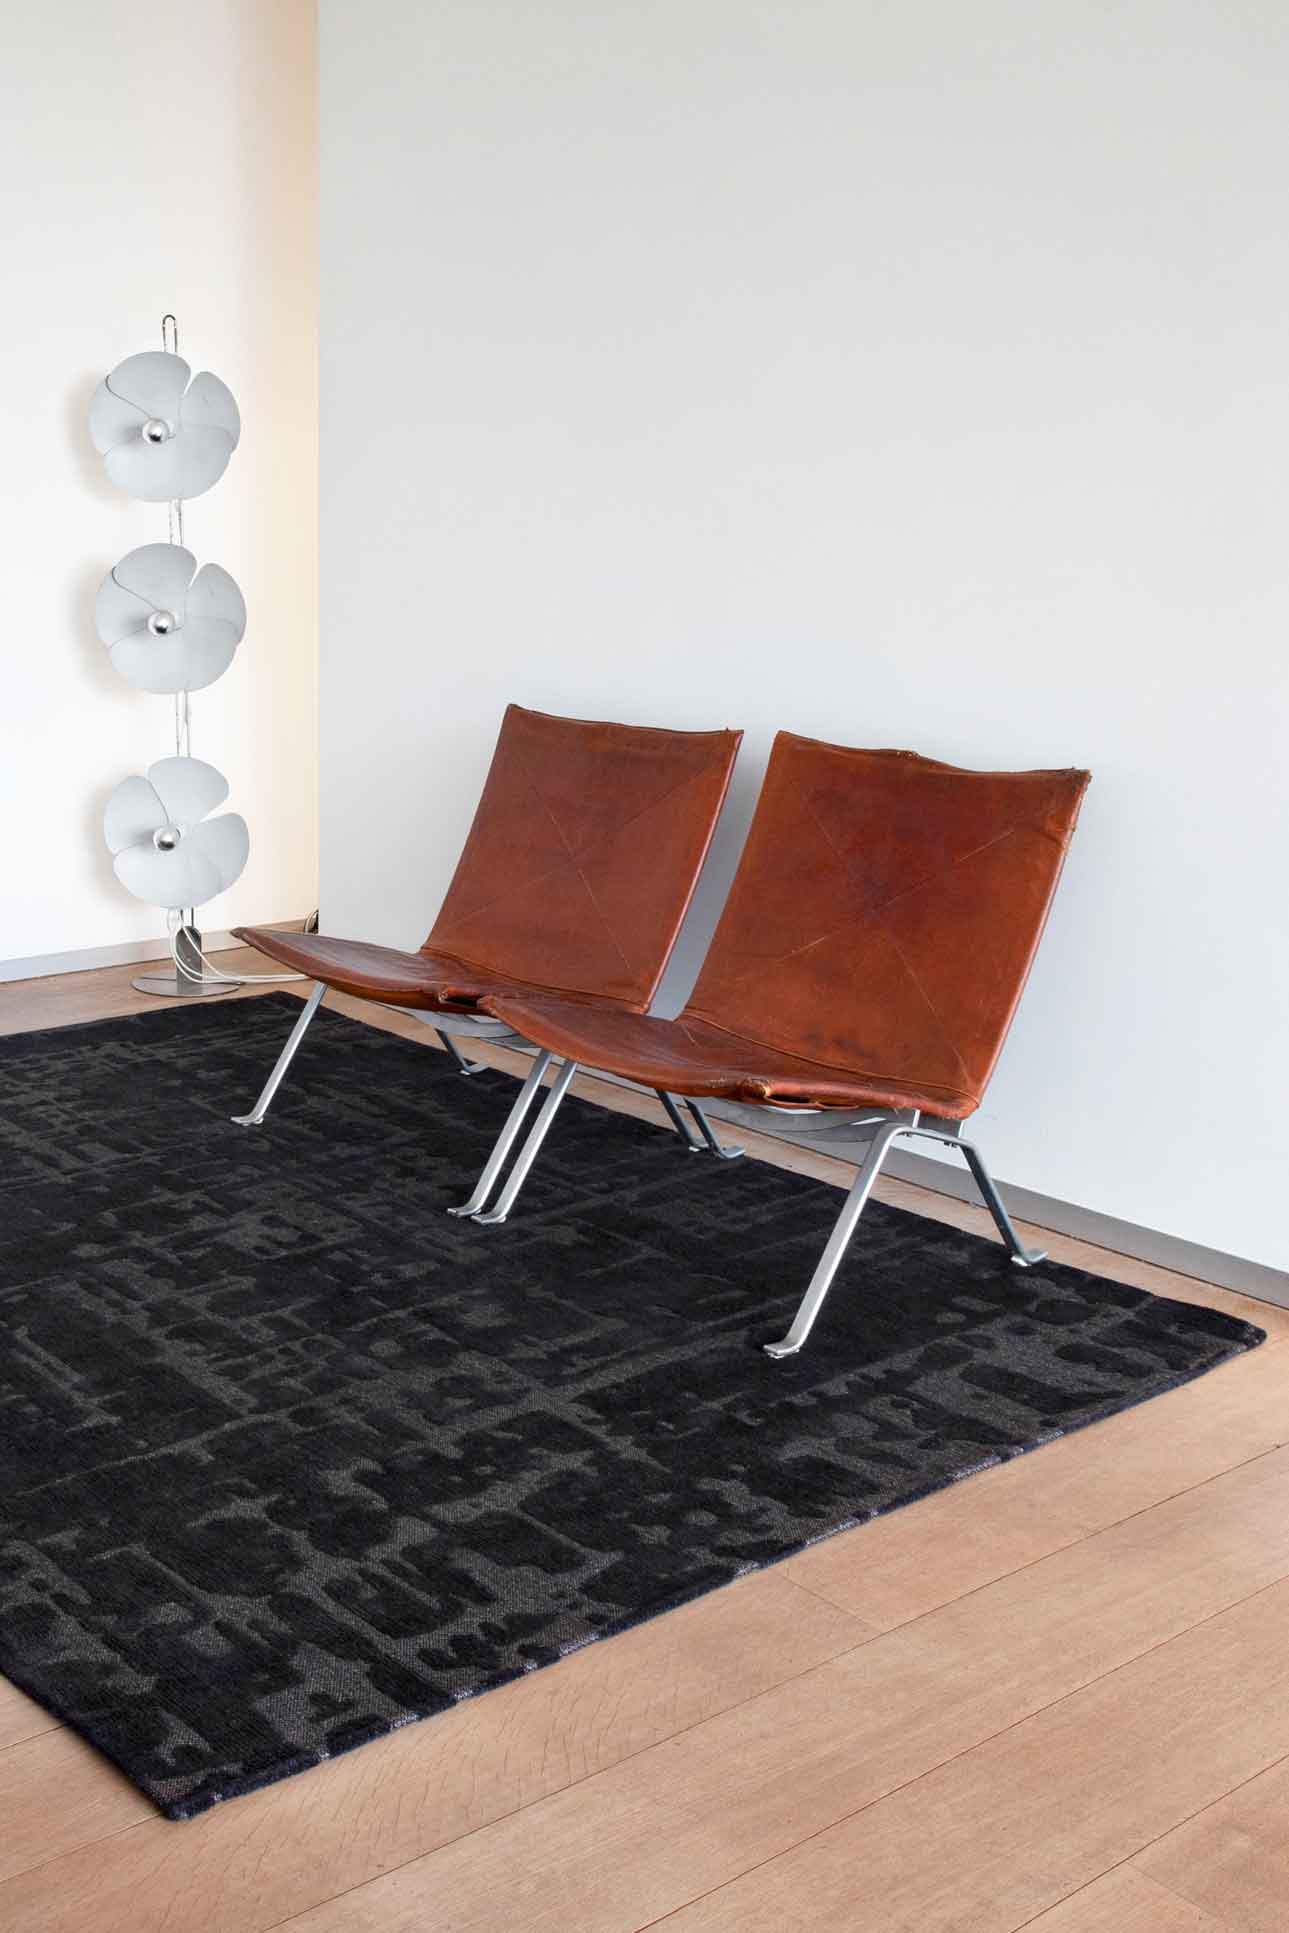 Abstract Black Belgian Rug ☞ Size: 5' 7" x 8' (170 x 240 cm)